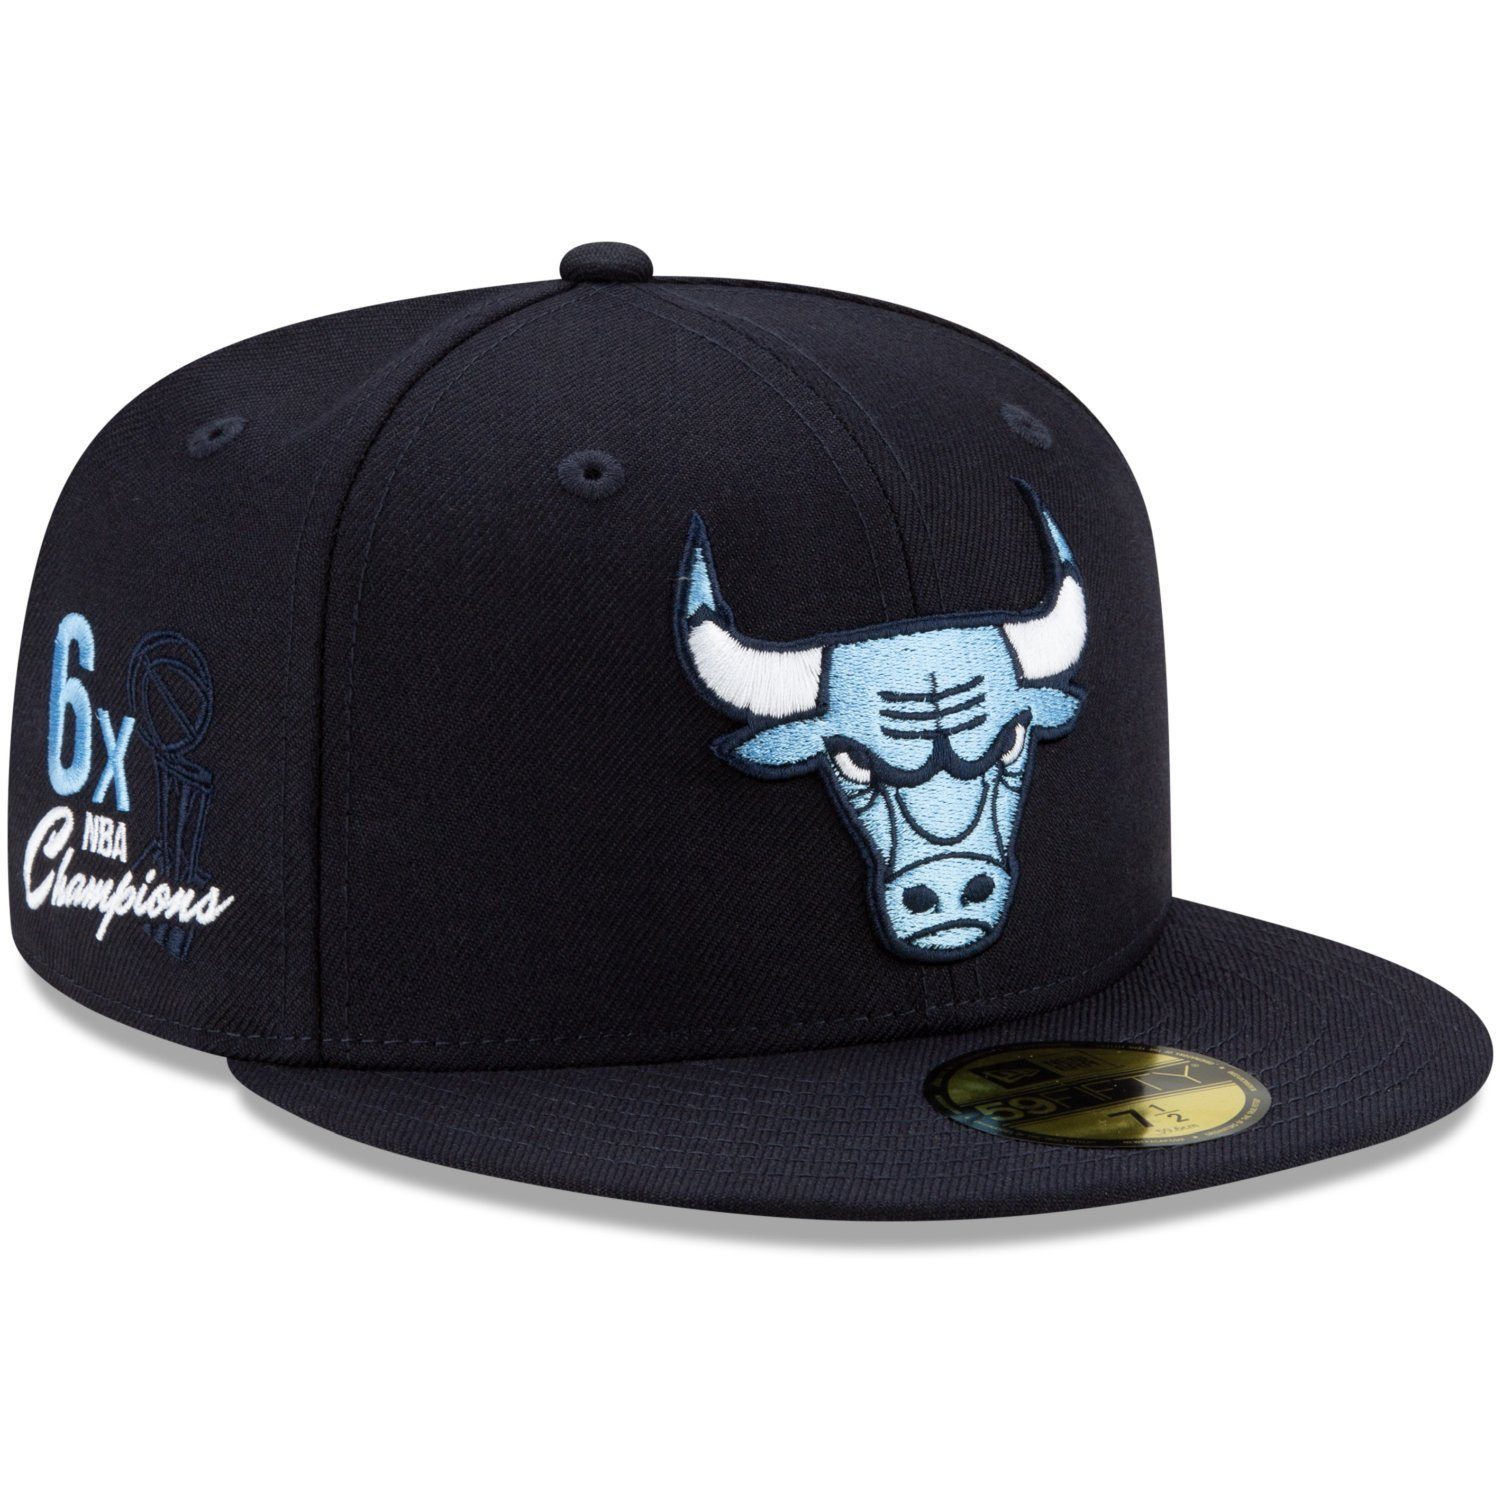 New Era Fitted Cap 59Fifty LIFESTYLE Chicago Bulls